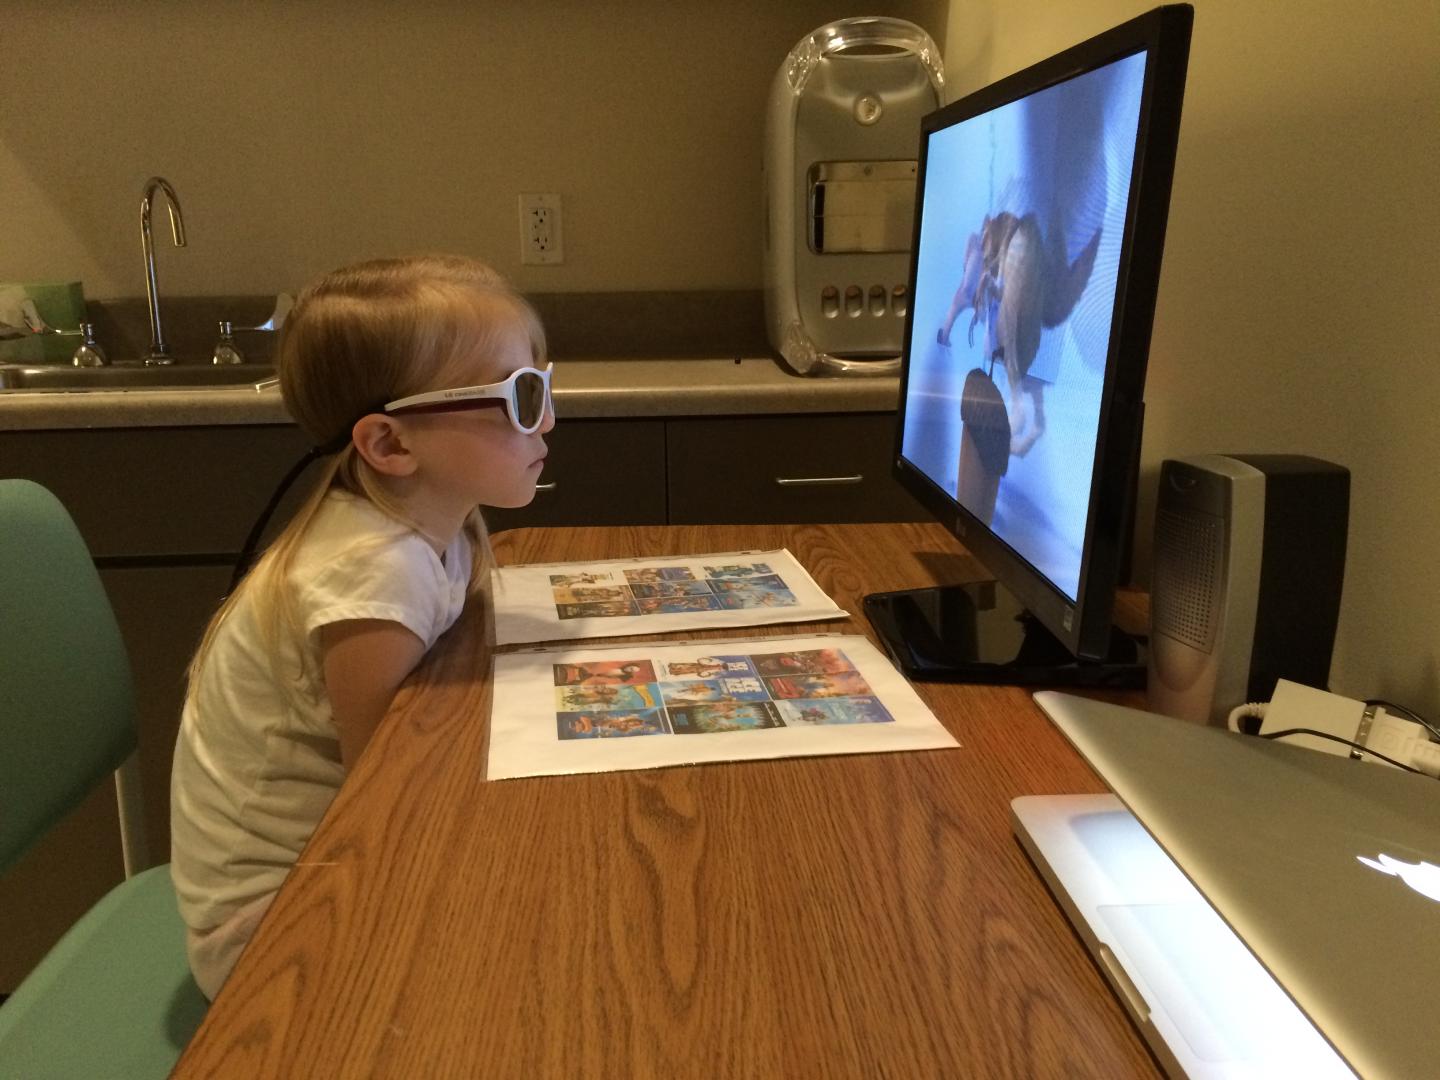 Watching Movies Helped Improve Vision in Children with Amblyopia